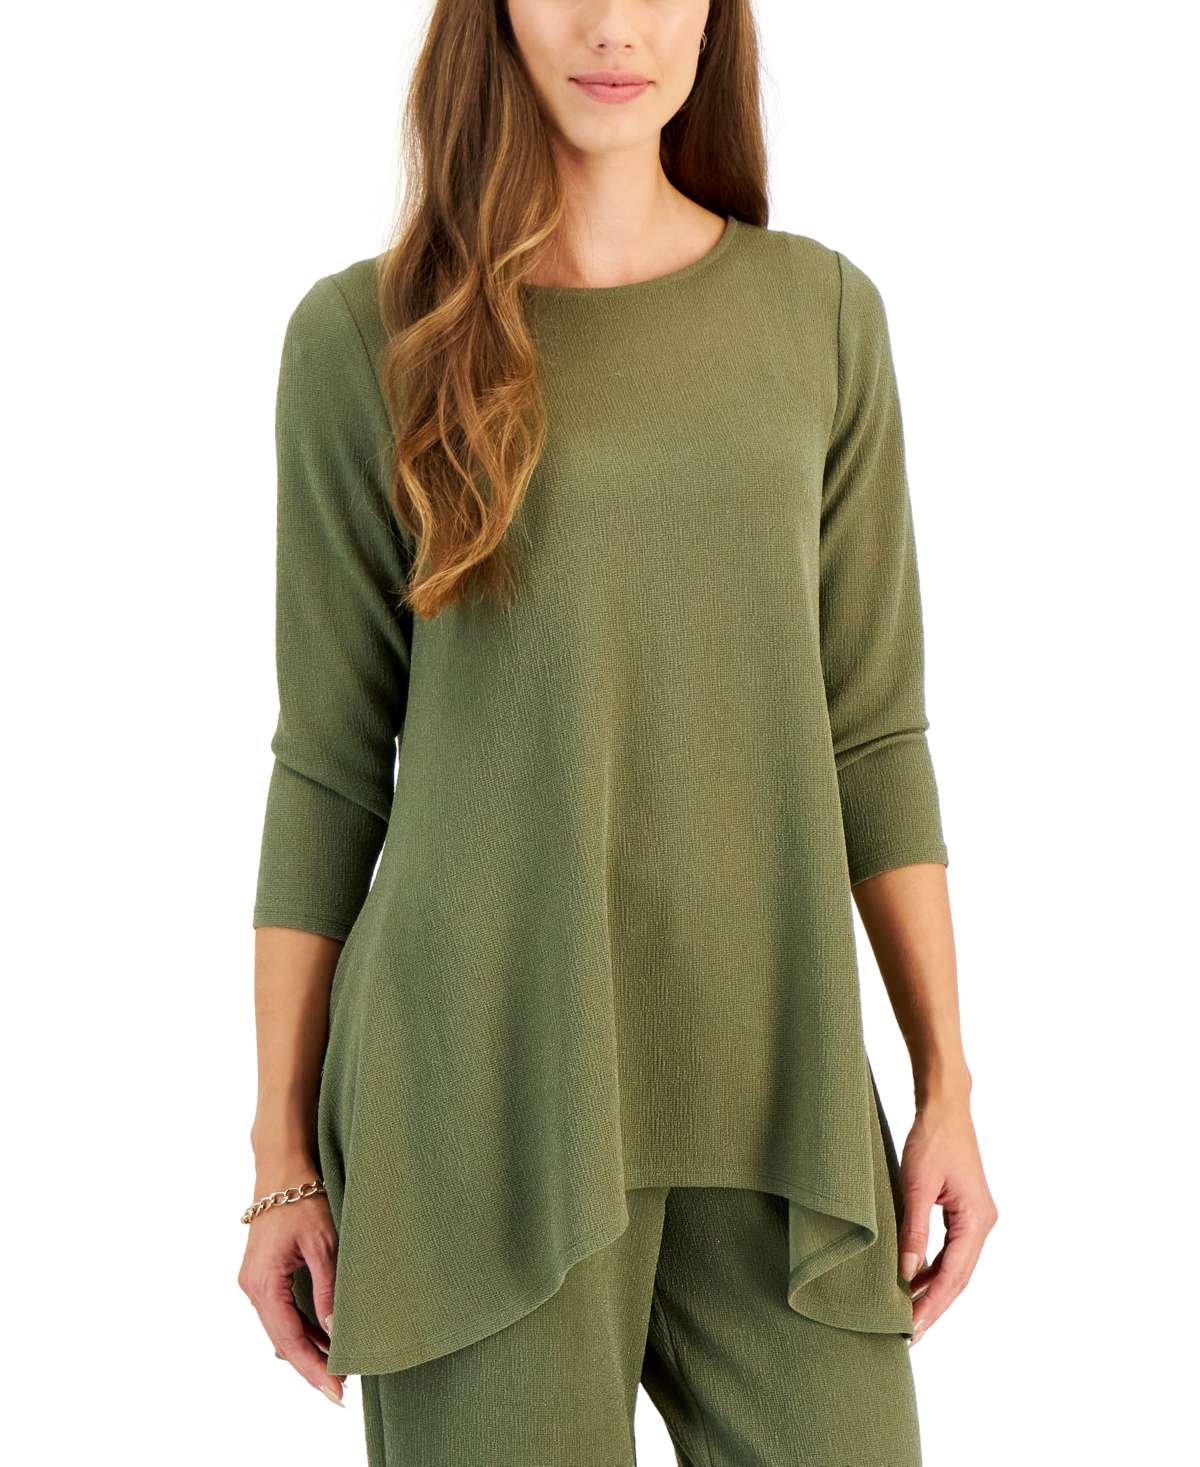 Jm Collection Women's New Shine Solid 3/4 Sleeve Knit Top, Created For Macy's In Tarnished Stem